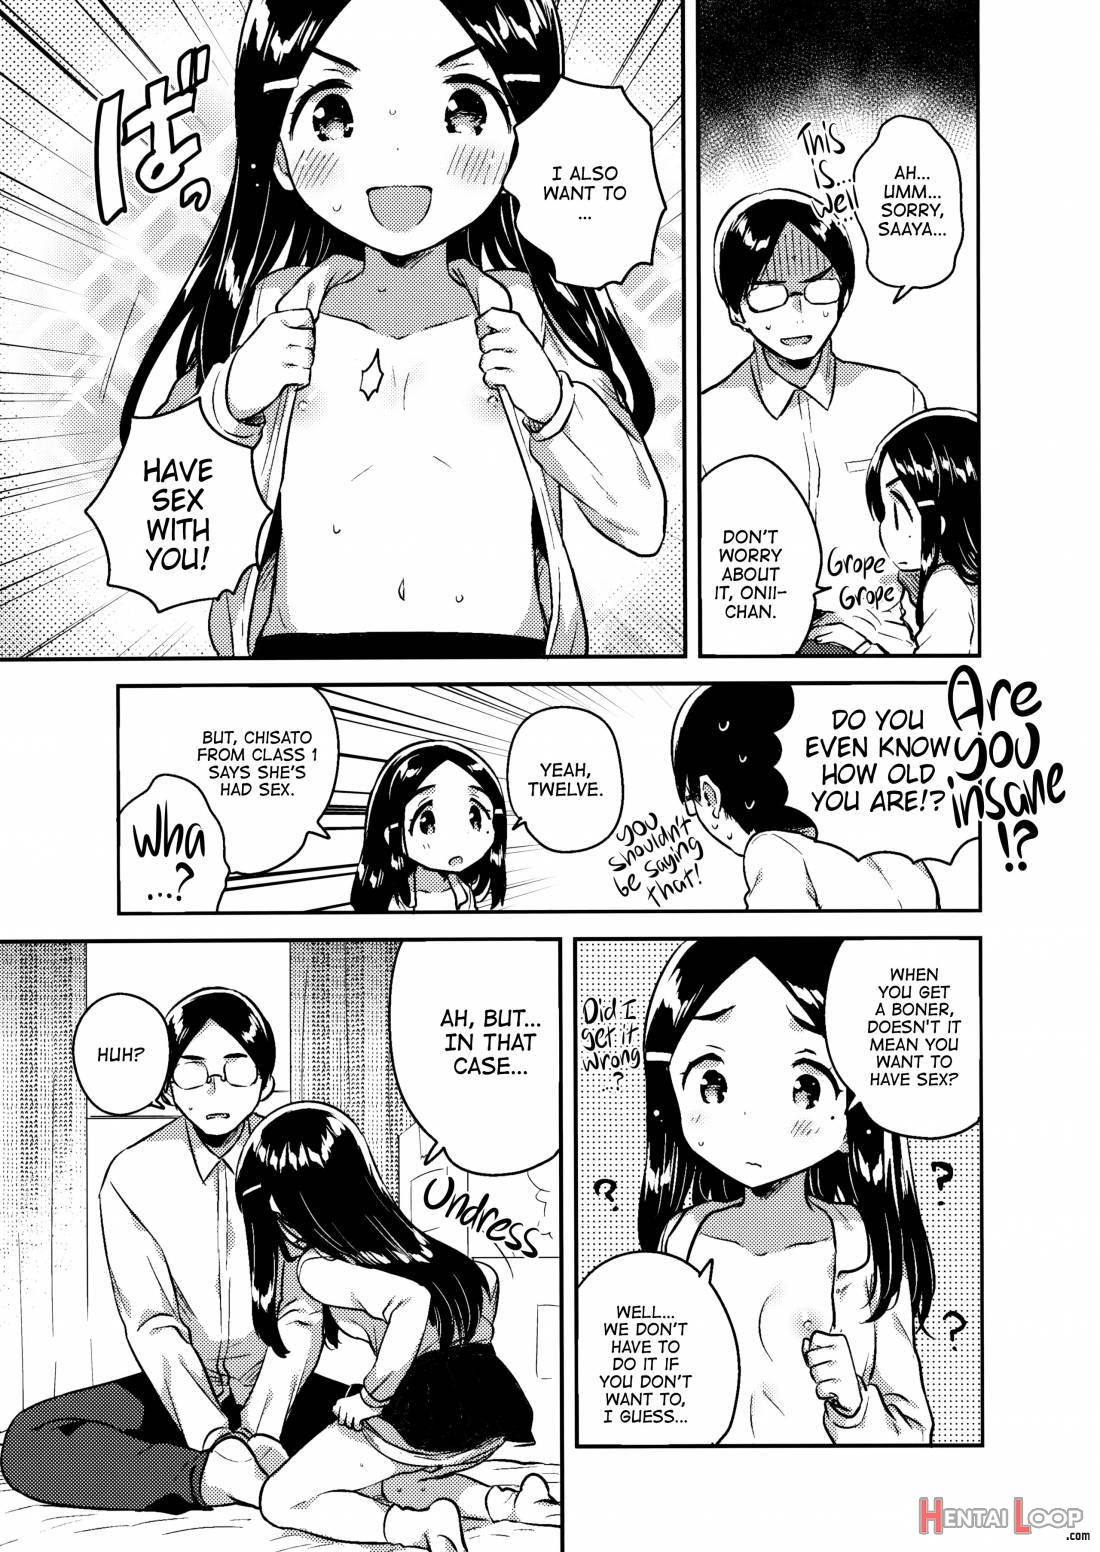 Imouto wa Mistress | My Little Sister Is My Mistress <First Chapter> page 8